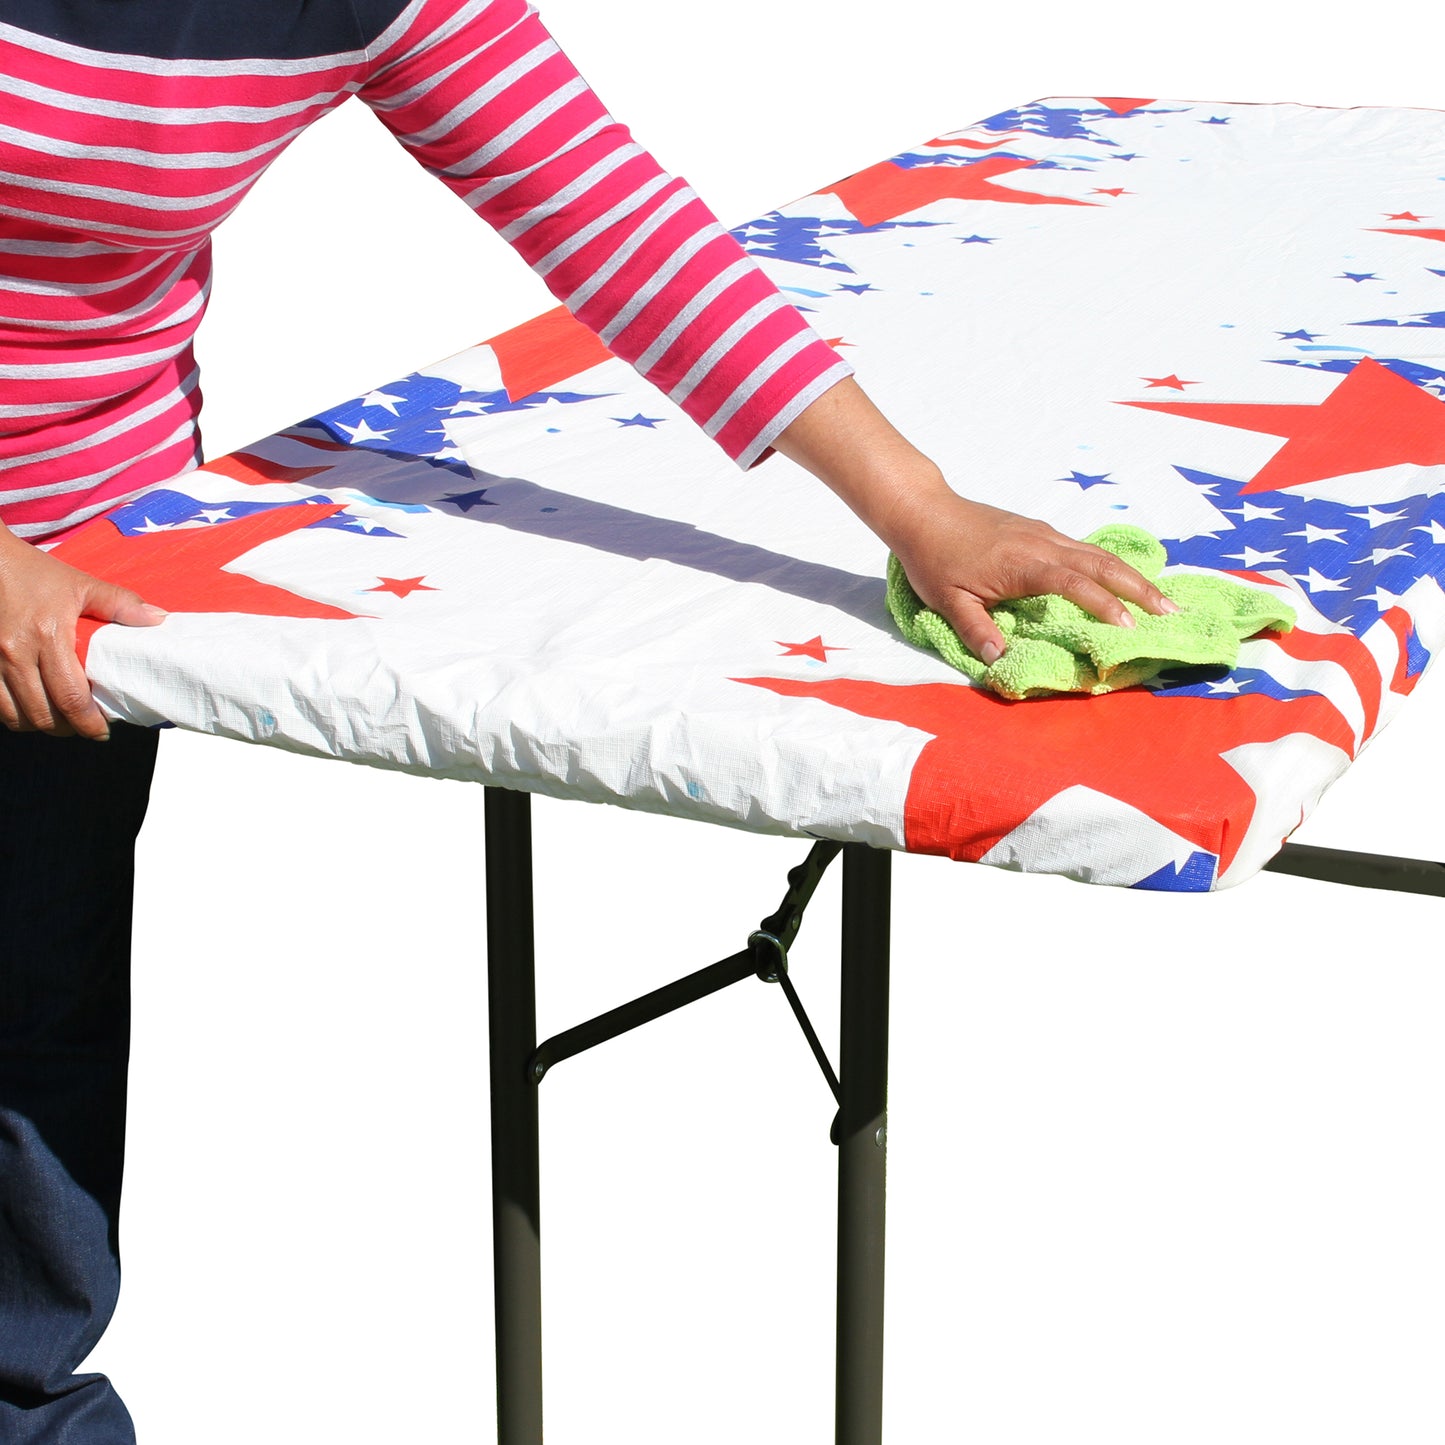 TableCloth PLUS 72" Patriotic Fitted PEVA Vinyl Tablecloth for 6' Folding Tables can be wiped clean with a cloth